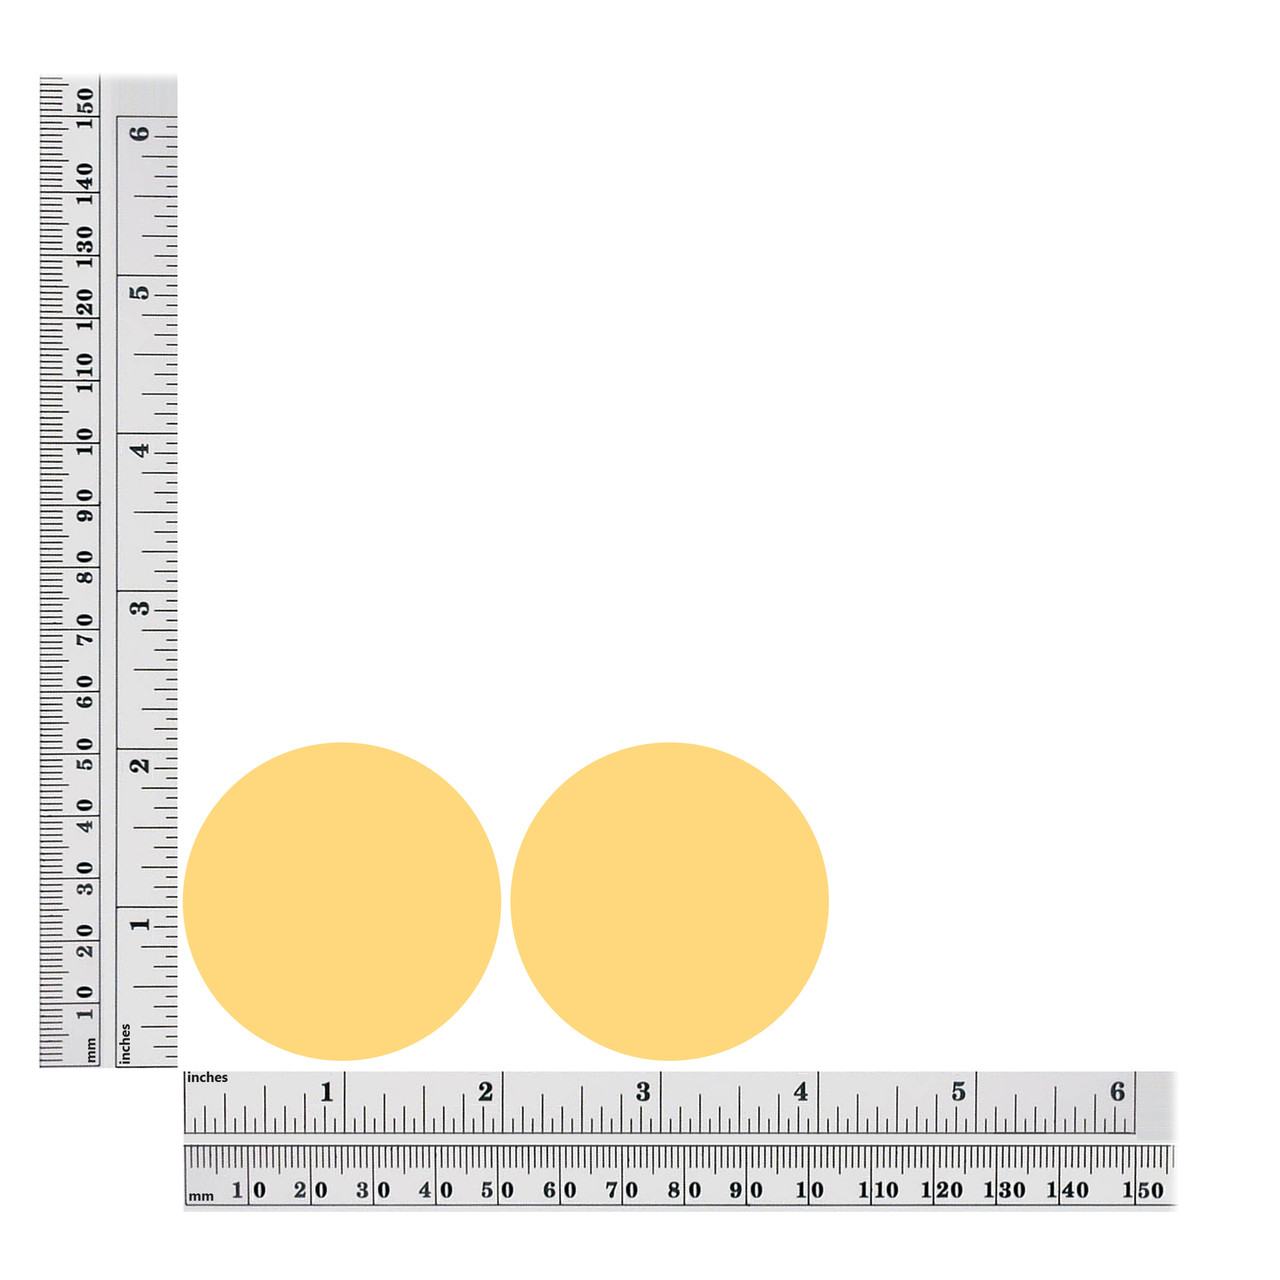 2 inch sequin size chart